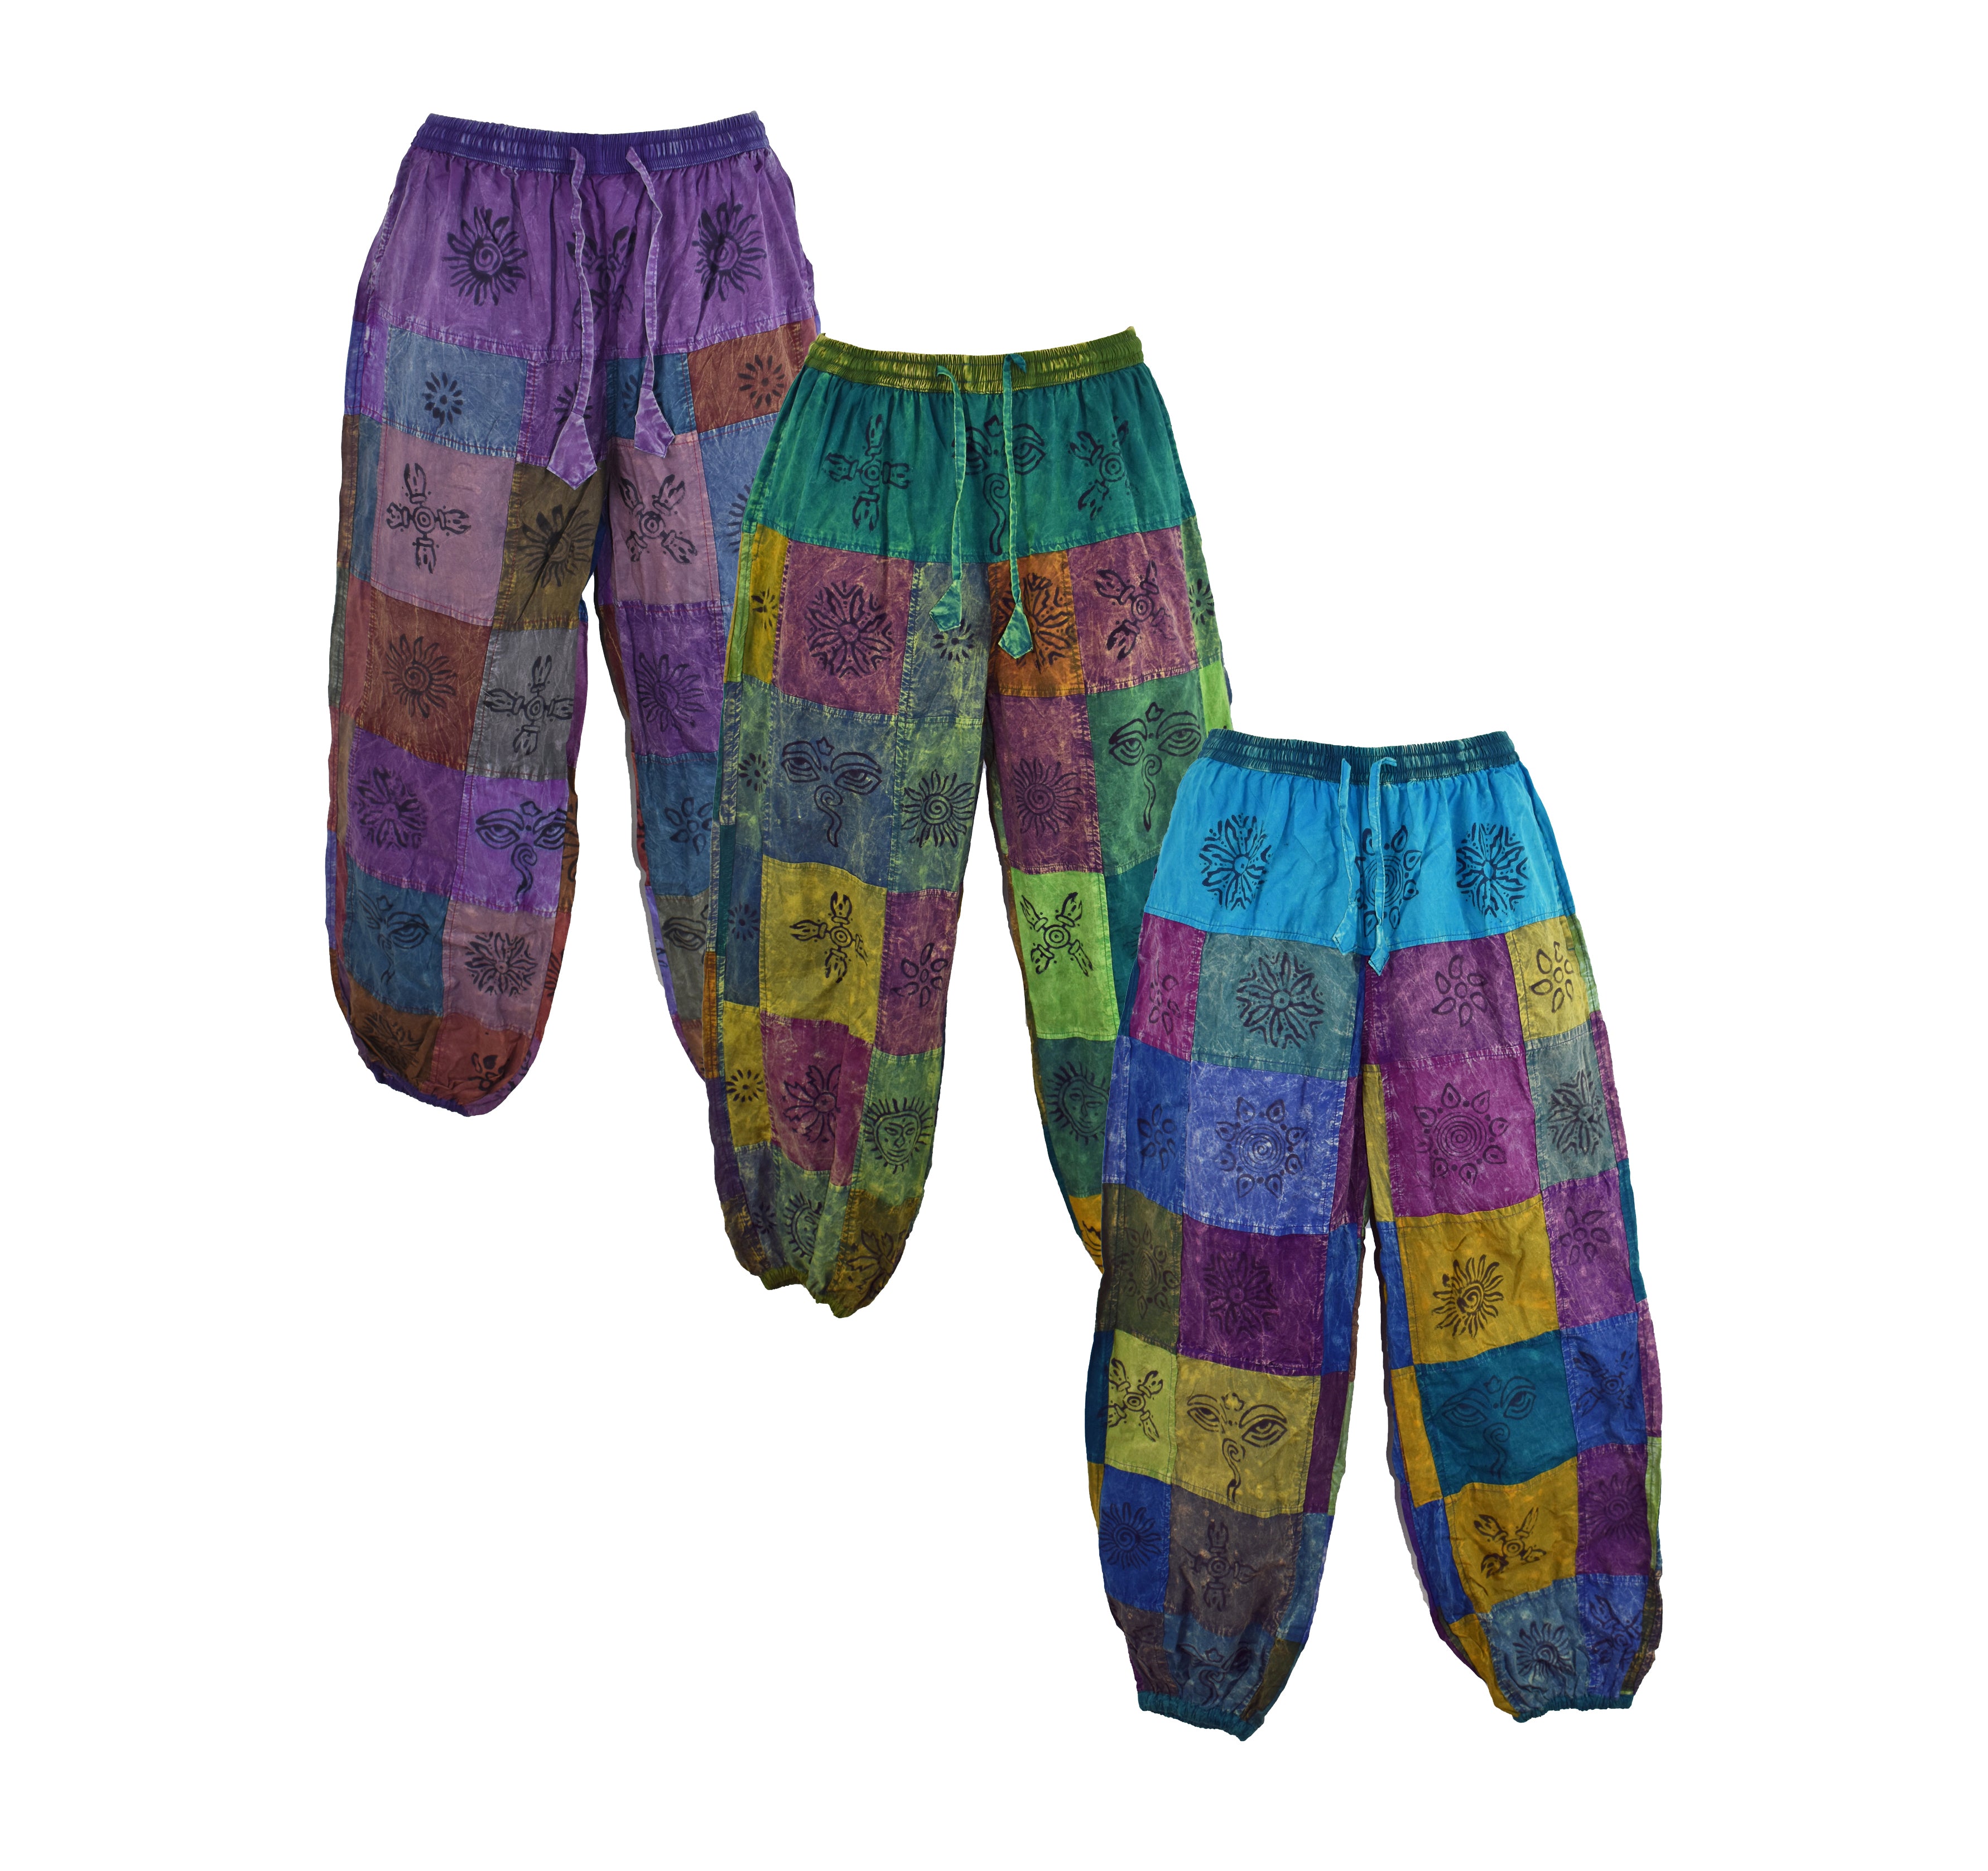 Nomad Travels Patchwork Unisex Harem Pants with Hippie Stamps | Hippie  outfits, Hippie style clothing, Earthy outfits